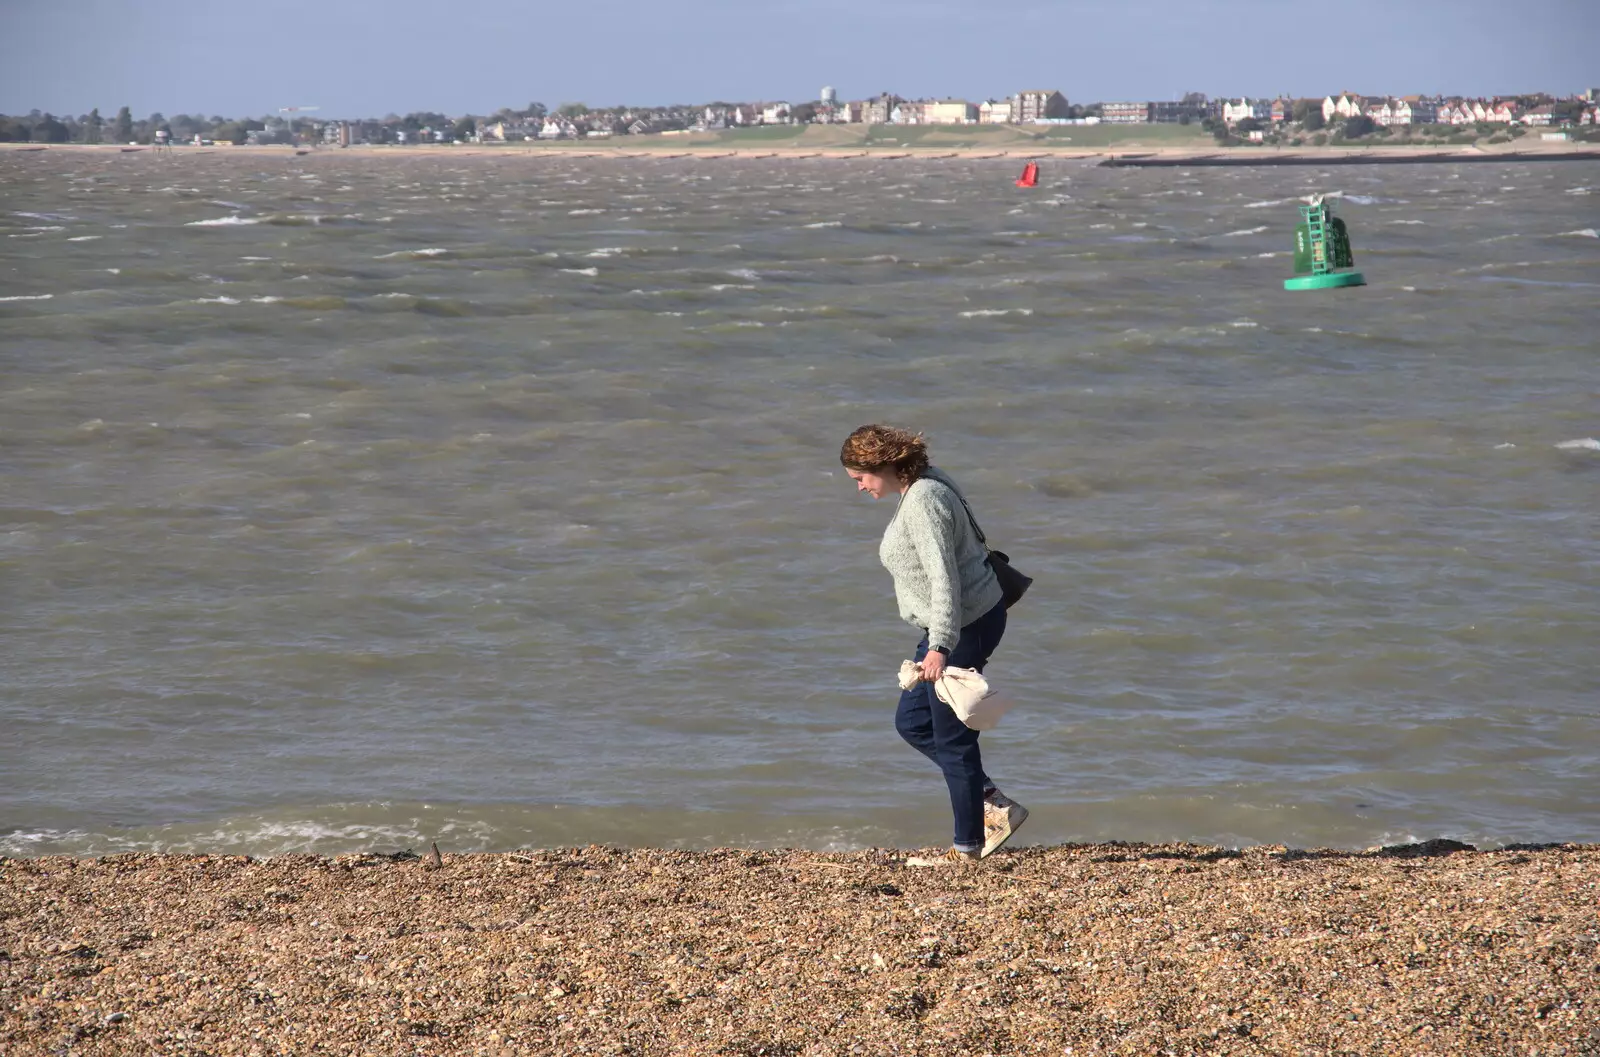 Isobel stomps into the wind, from A Postcard from Felixstowe, Suffolk - 5th October 2022